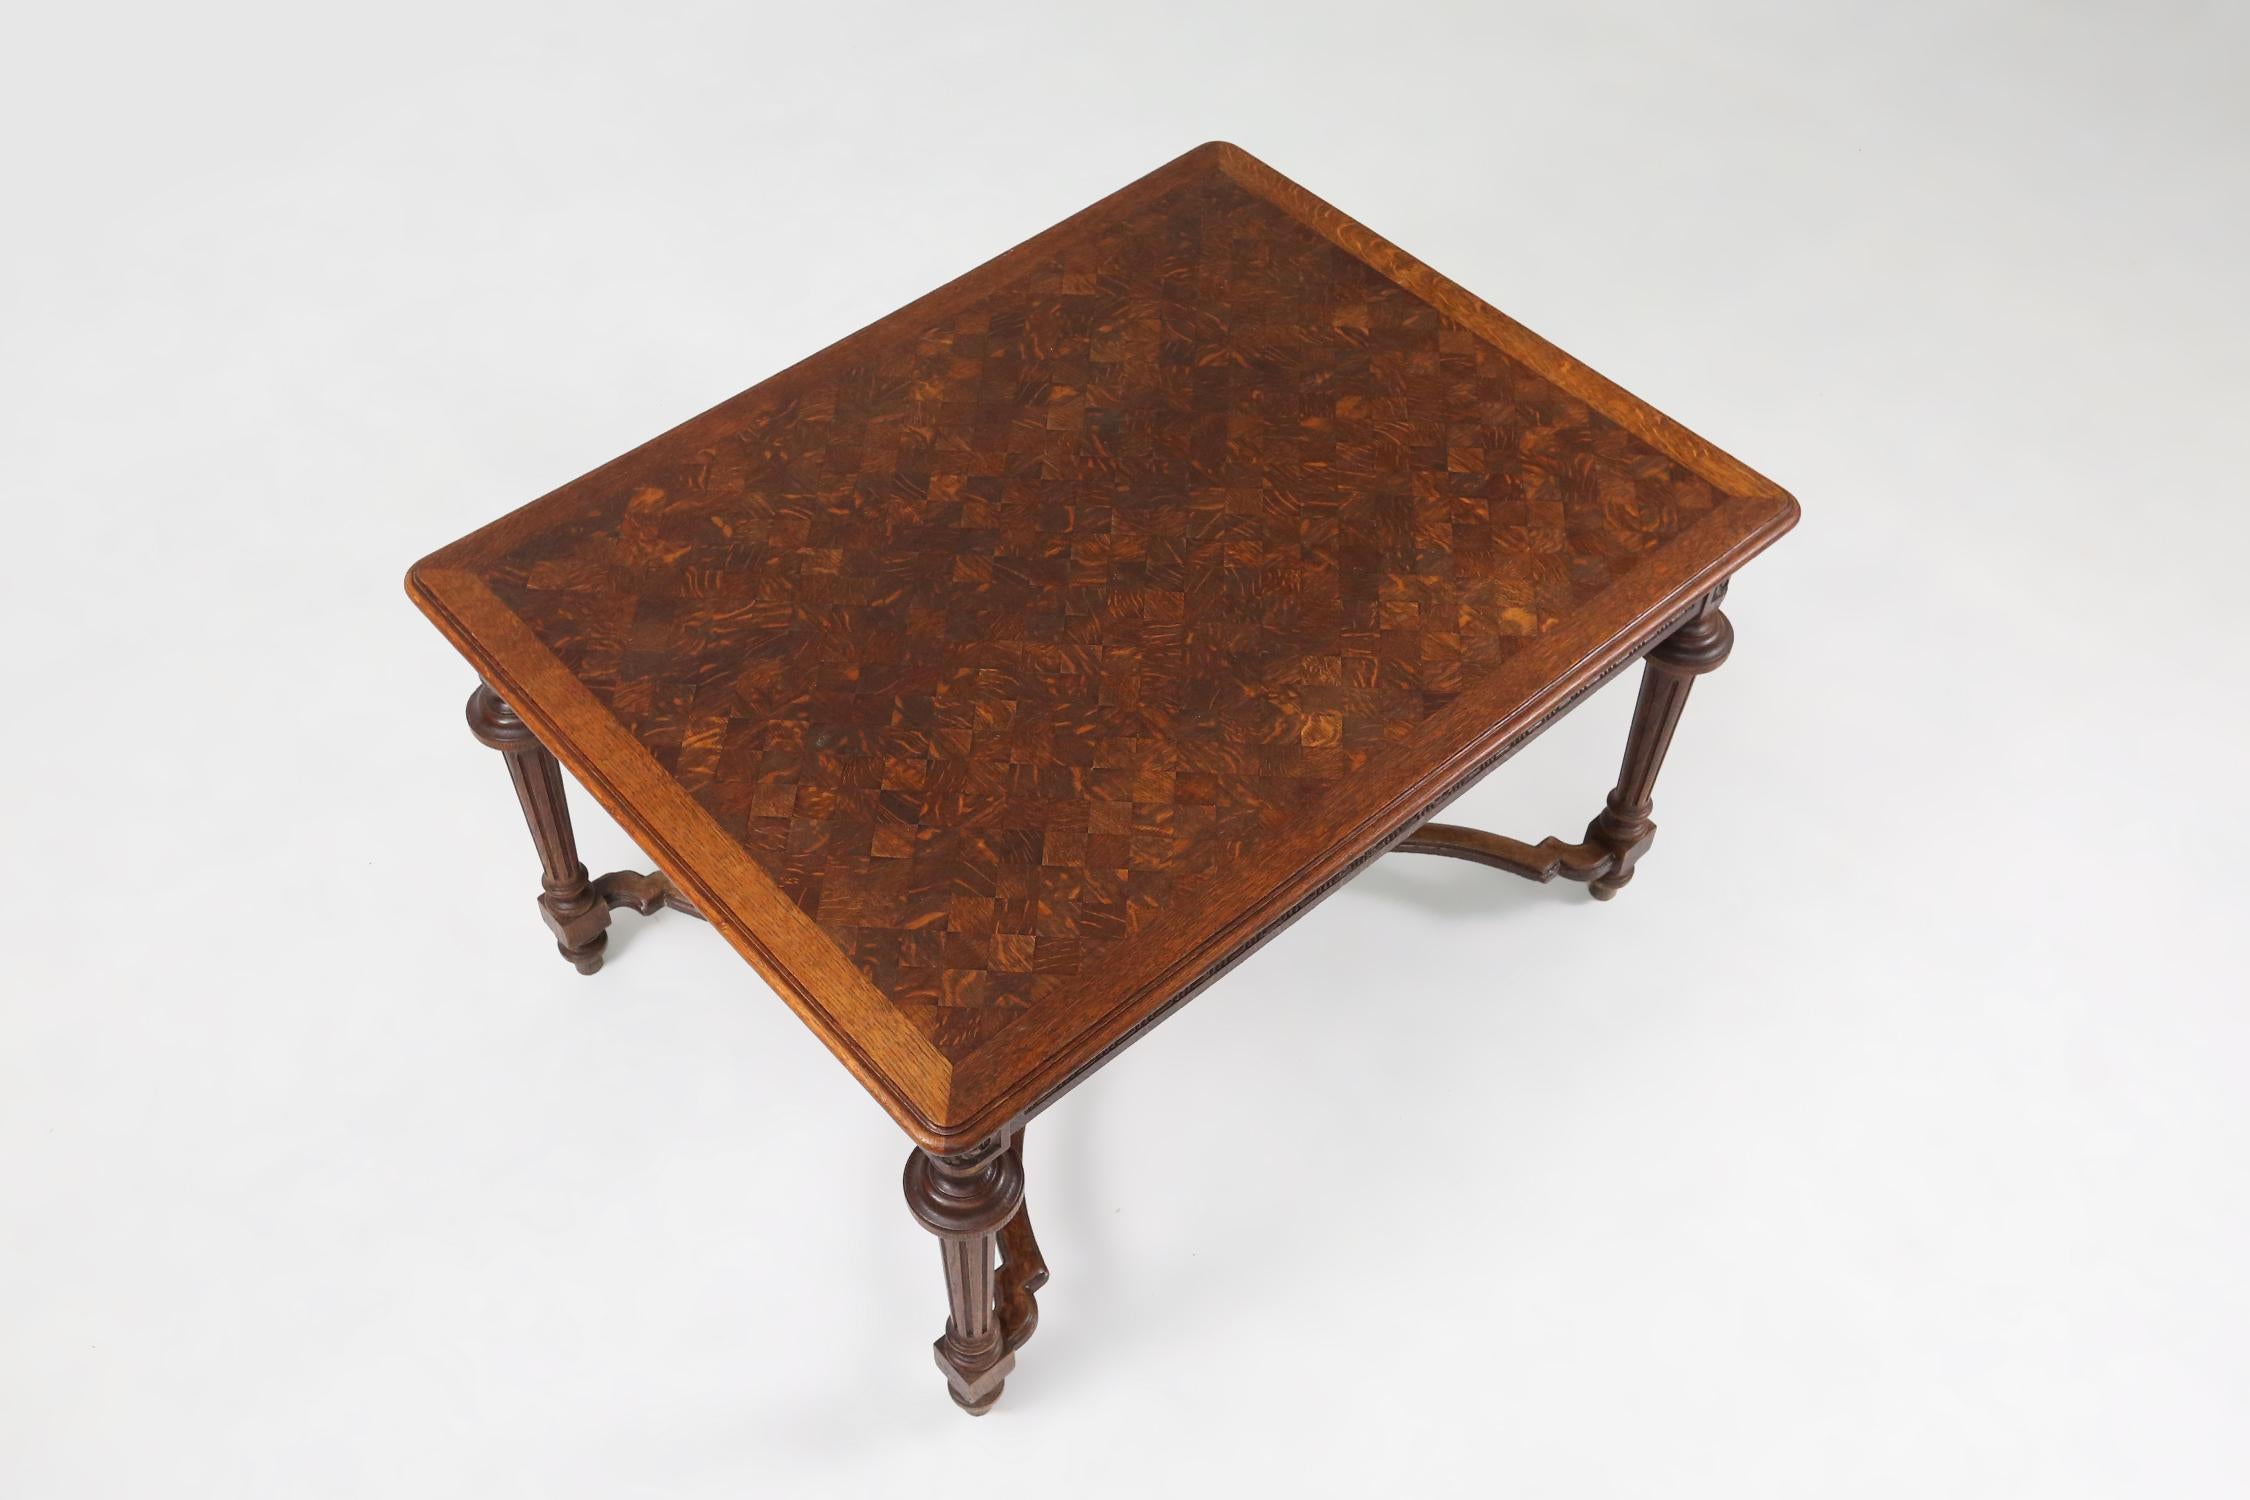 France / 1900 / Neo Renaissance / extendable dining table / hand carved wood and chess board top   

This exquisite table is a hard to find piece of neo-renaissance design, originating from France, 1900. The intricate carving on both the top and